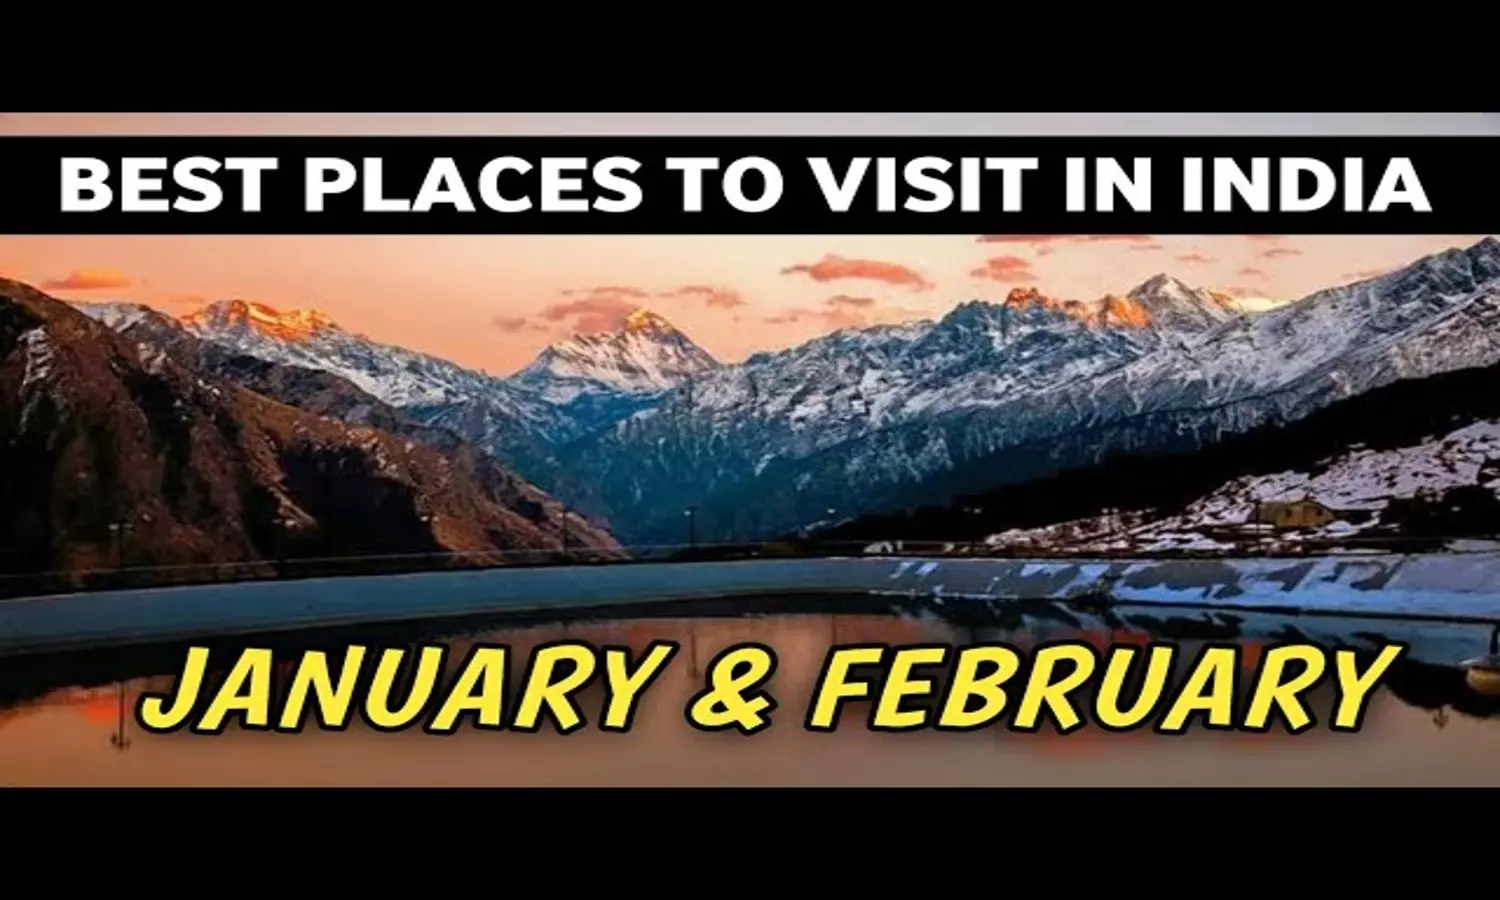 Visit This place in January and February